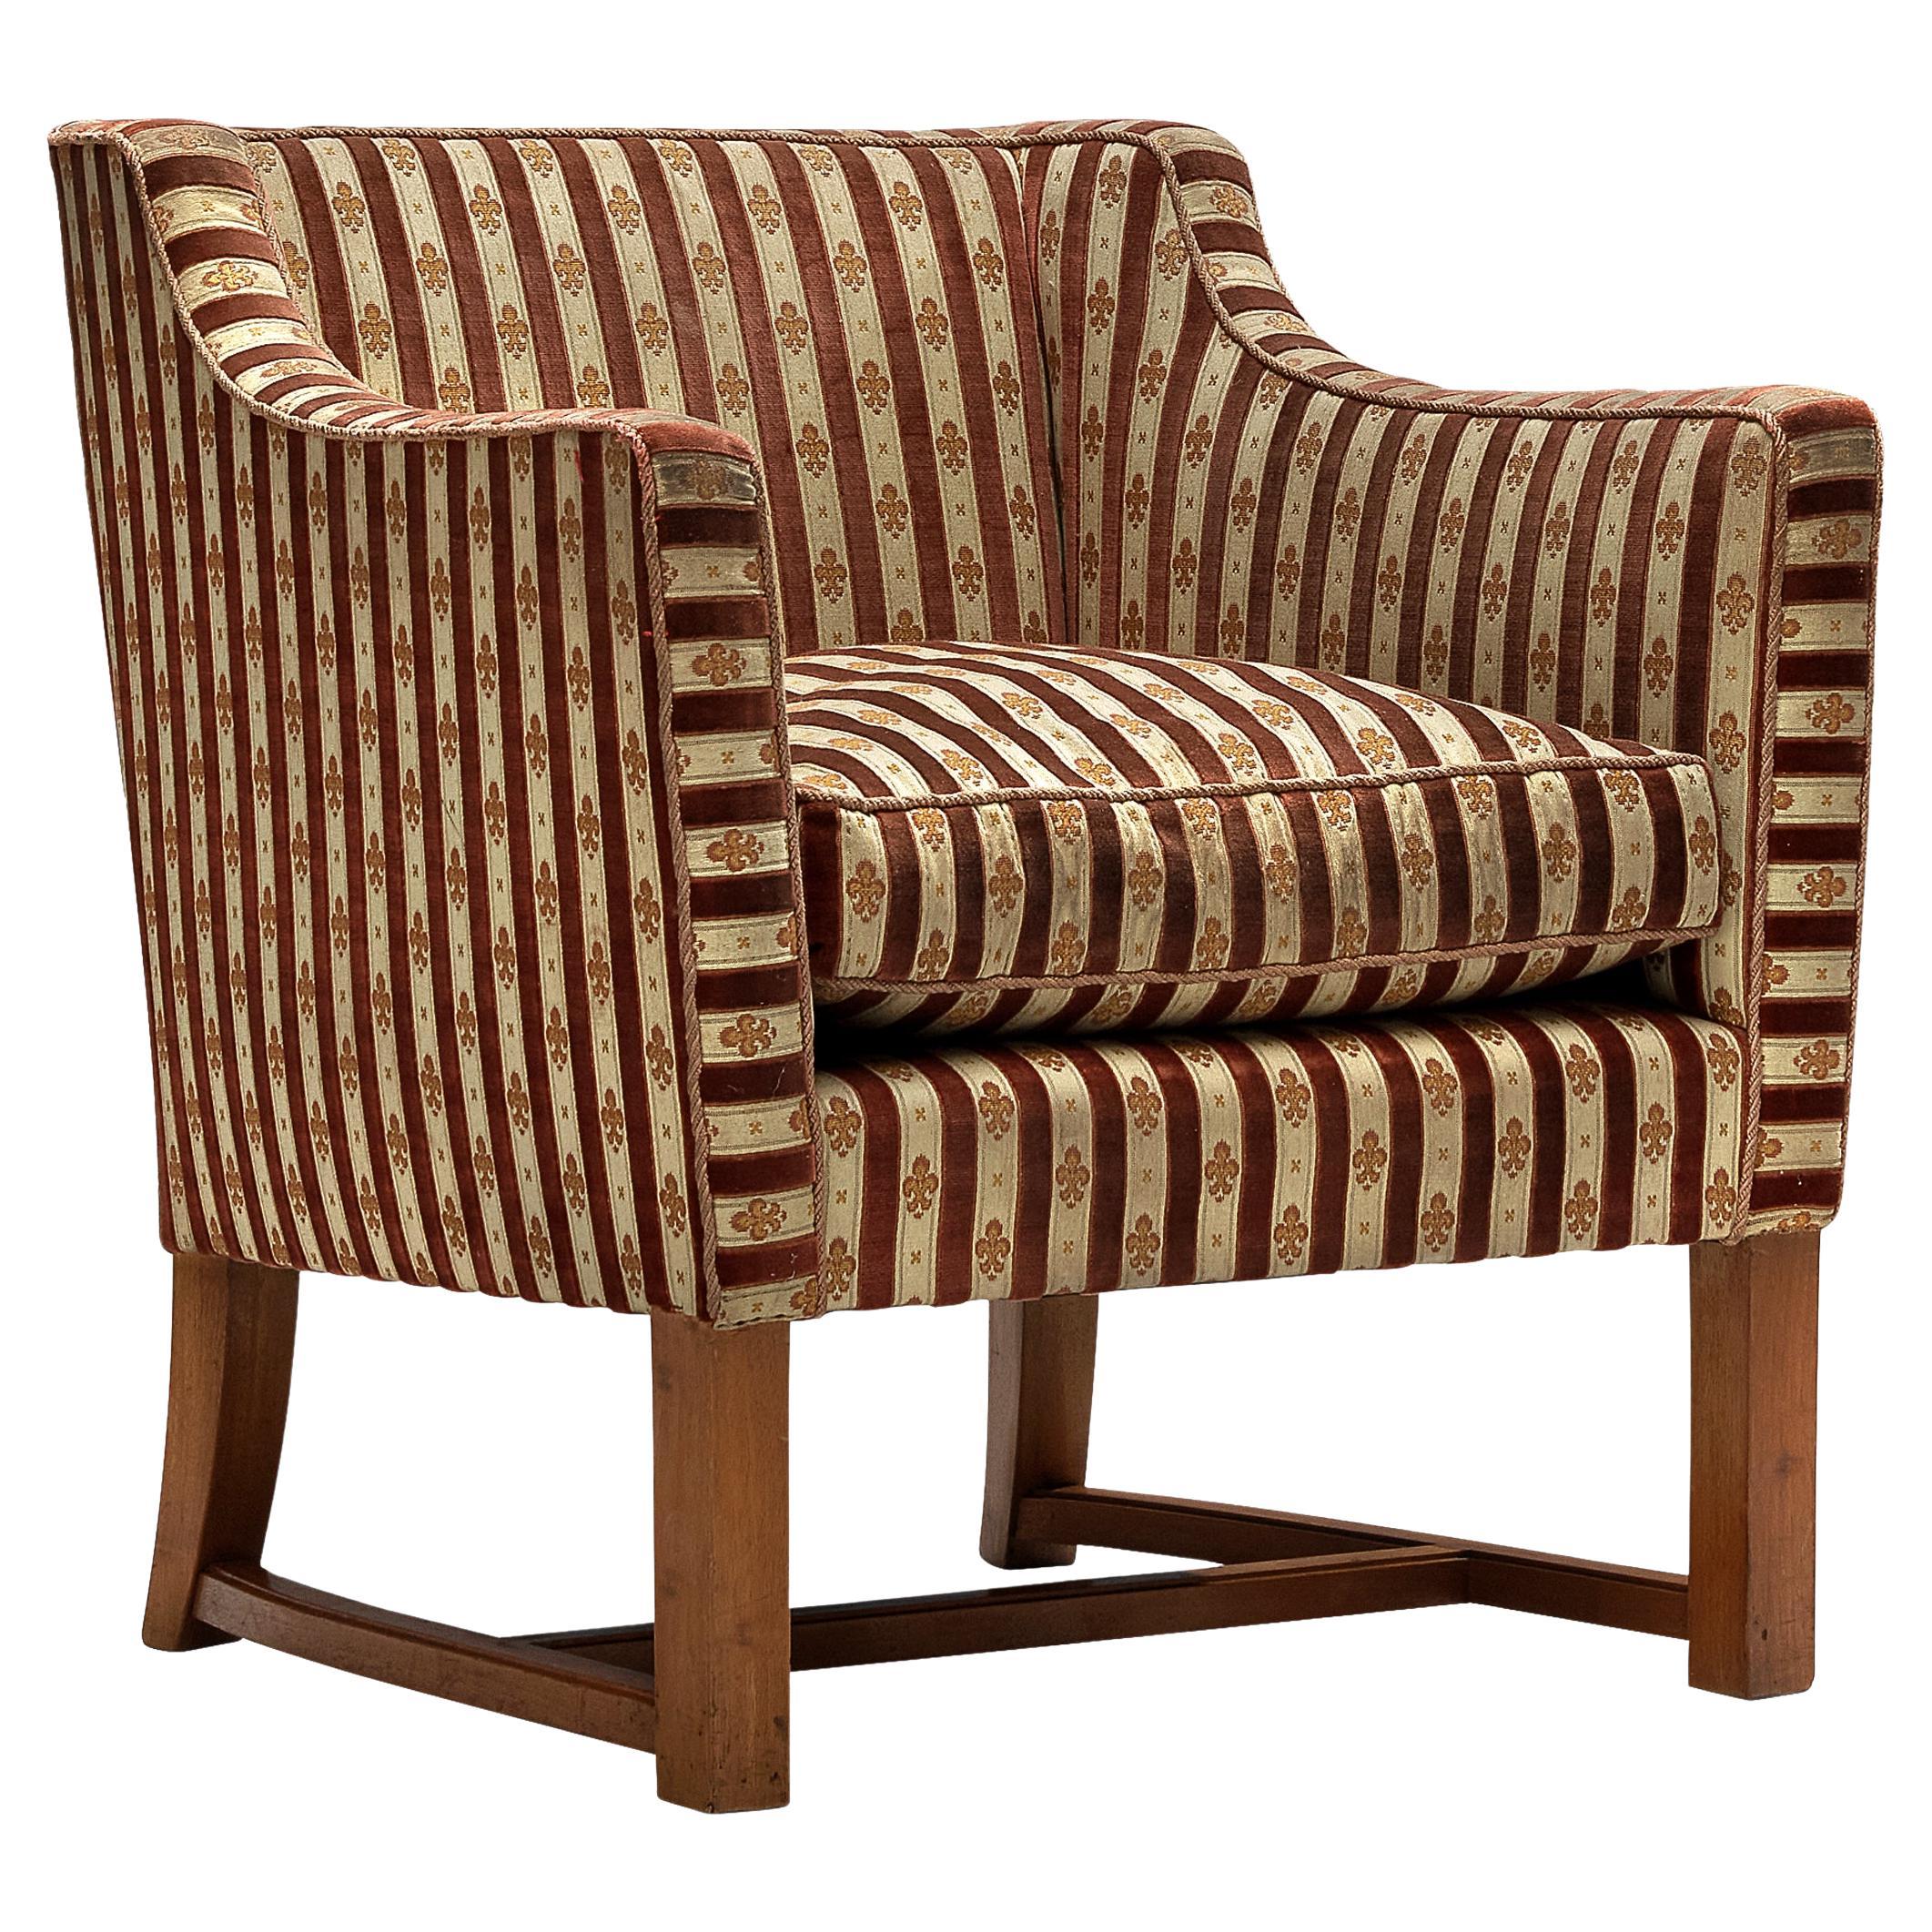 Art Deco Armchair in Red Striped Fleurs de Lis Patterned Upholstery  For Sale